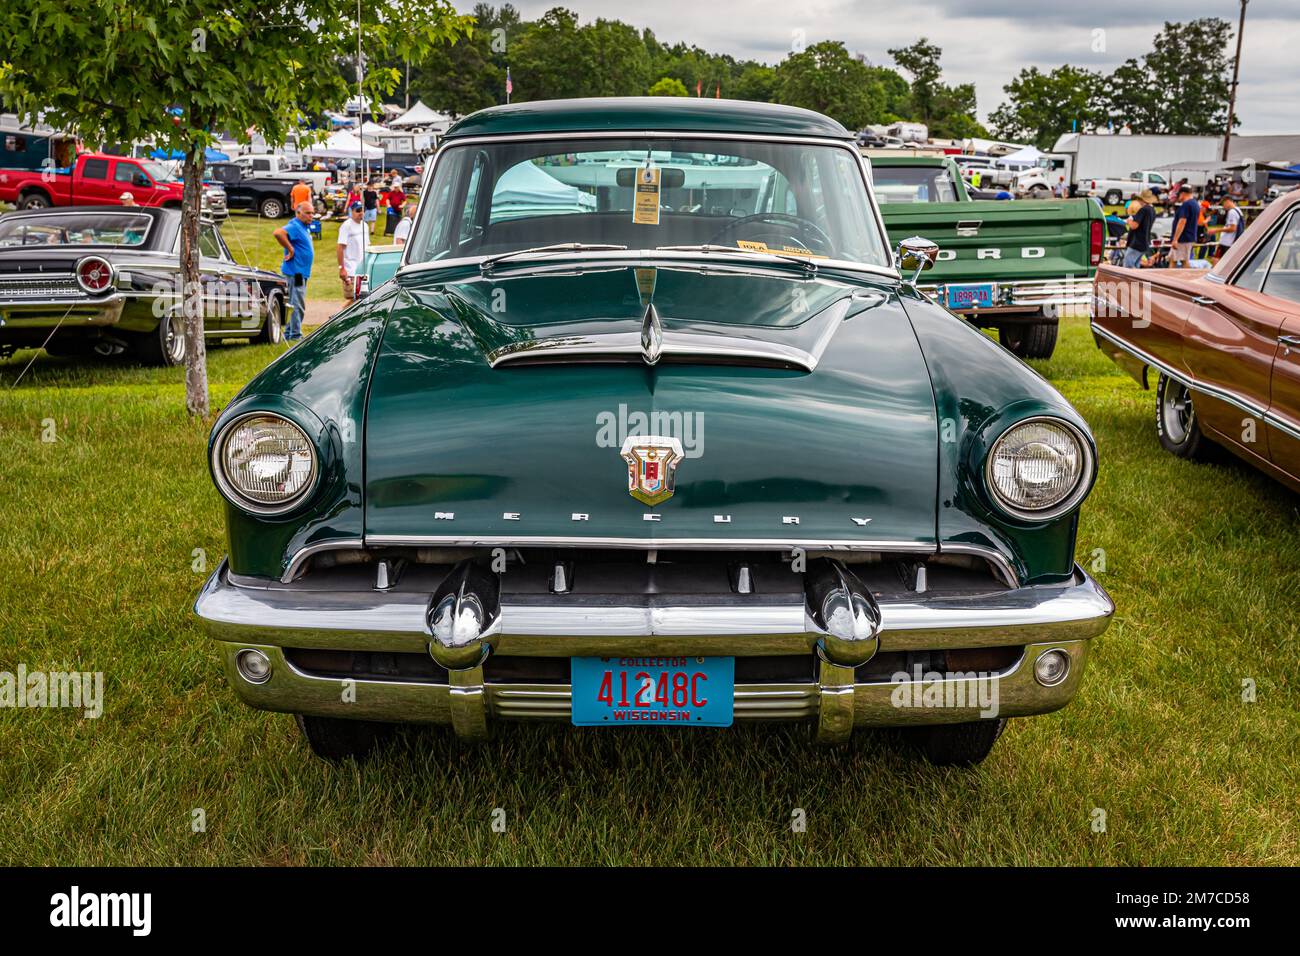 Iola, WI - July 07, 2022: High perspective front view of a 1953 Mercury Monterey 4 Door Sedan at a local car show. Stock Photo